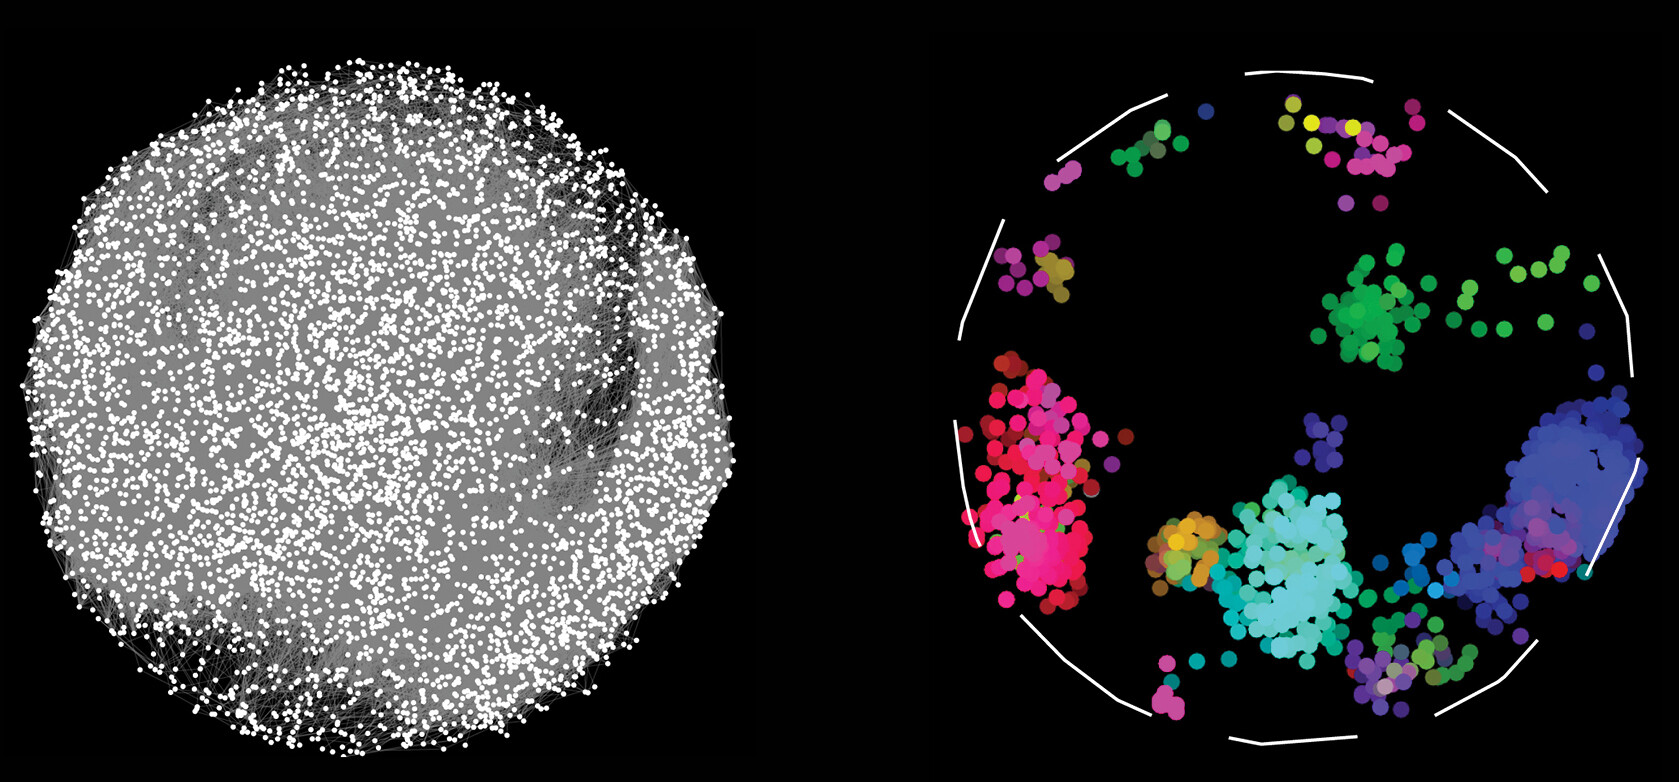 network illustration showing how thousands of proteins in human cells interact